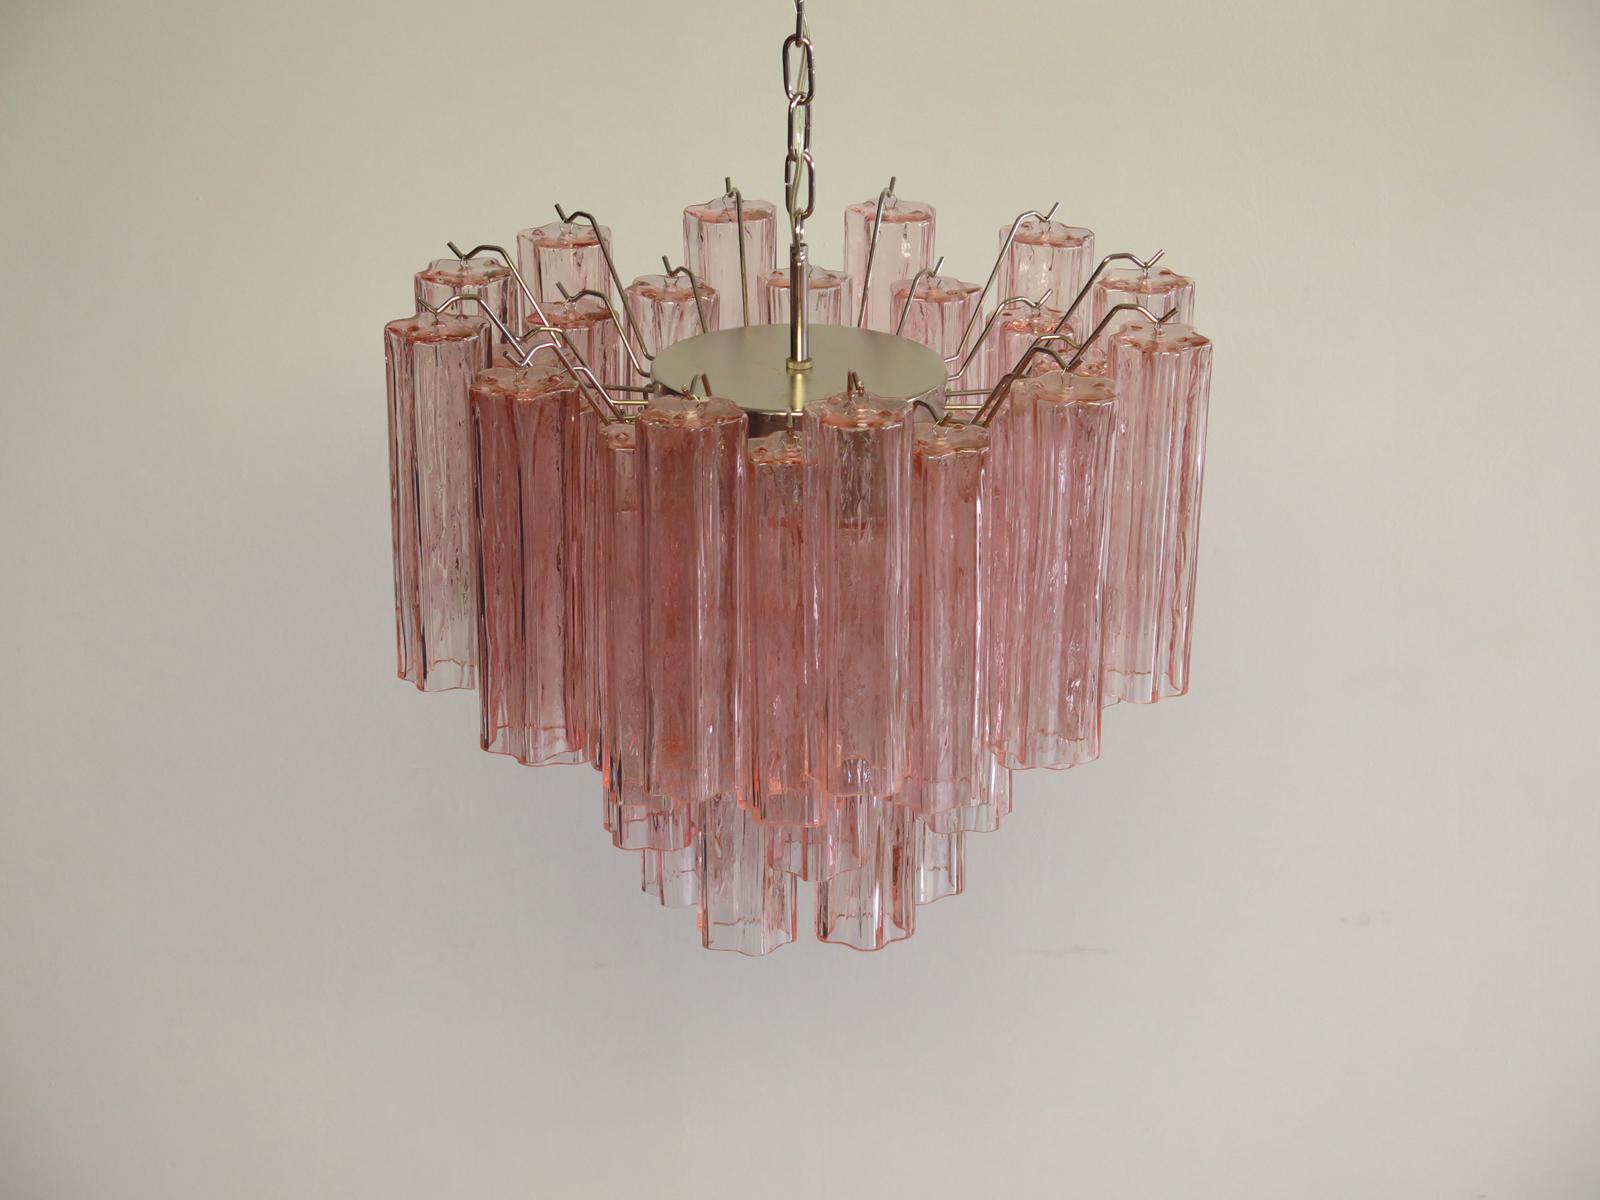 Italian vintage chandelier in Murano glass and nickel-plated metal structure. The armor polished nickel supports 36 large pink glass tubes in a star shape.
Period: Late 20th century
Dimensions: 45.30 inches (115 cm) height with chain, 19.70 inches